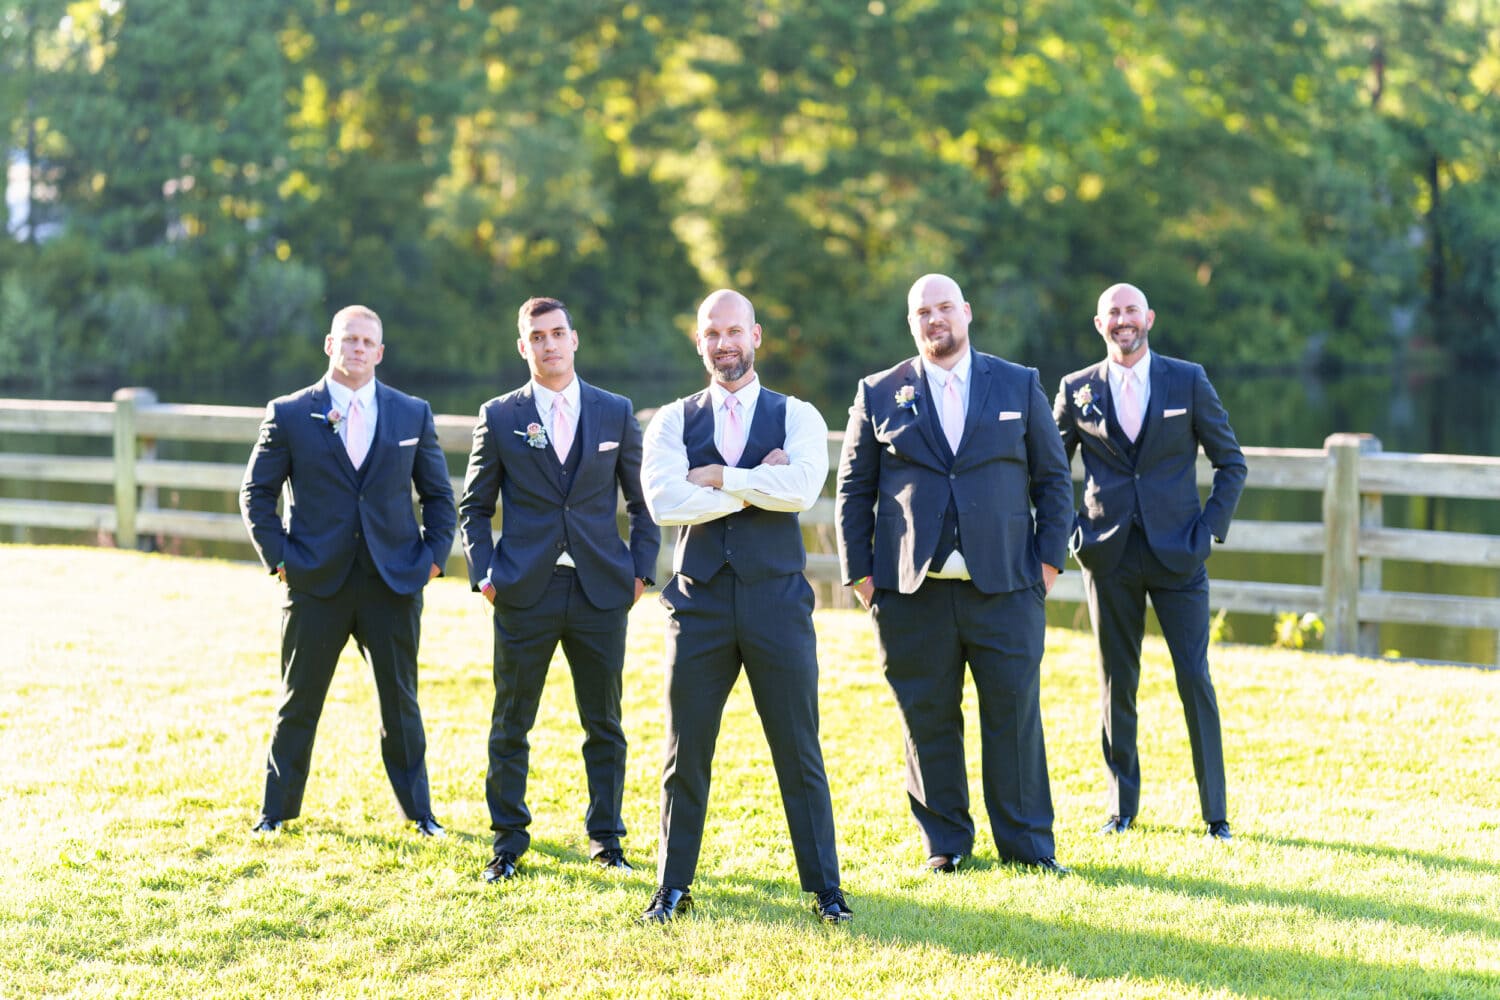 Flying V pose with the groomsmen - The Pavilion at Pepper Plantation